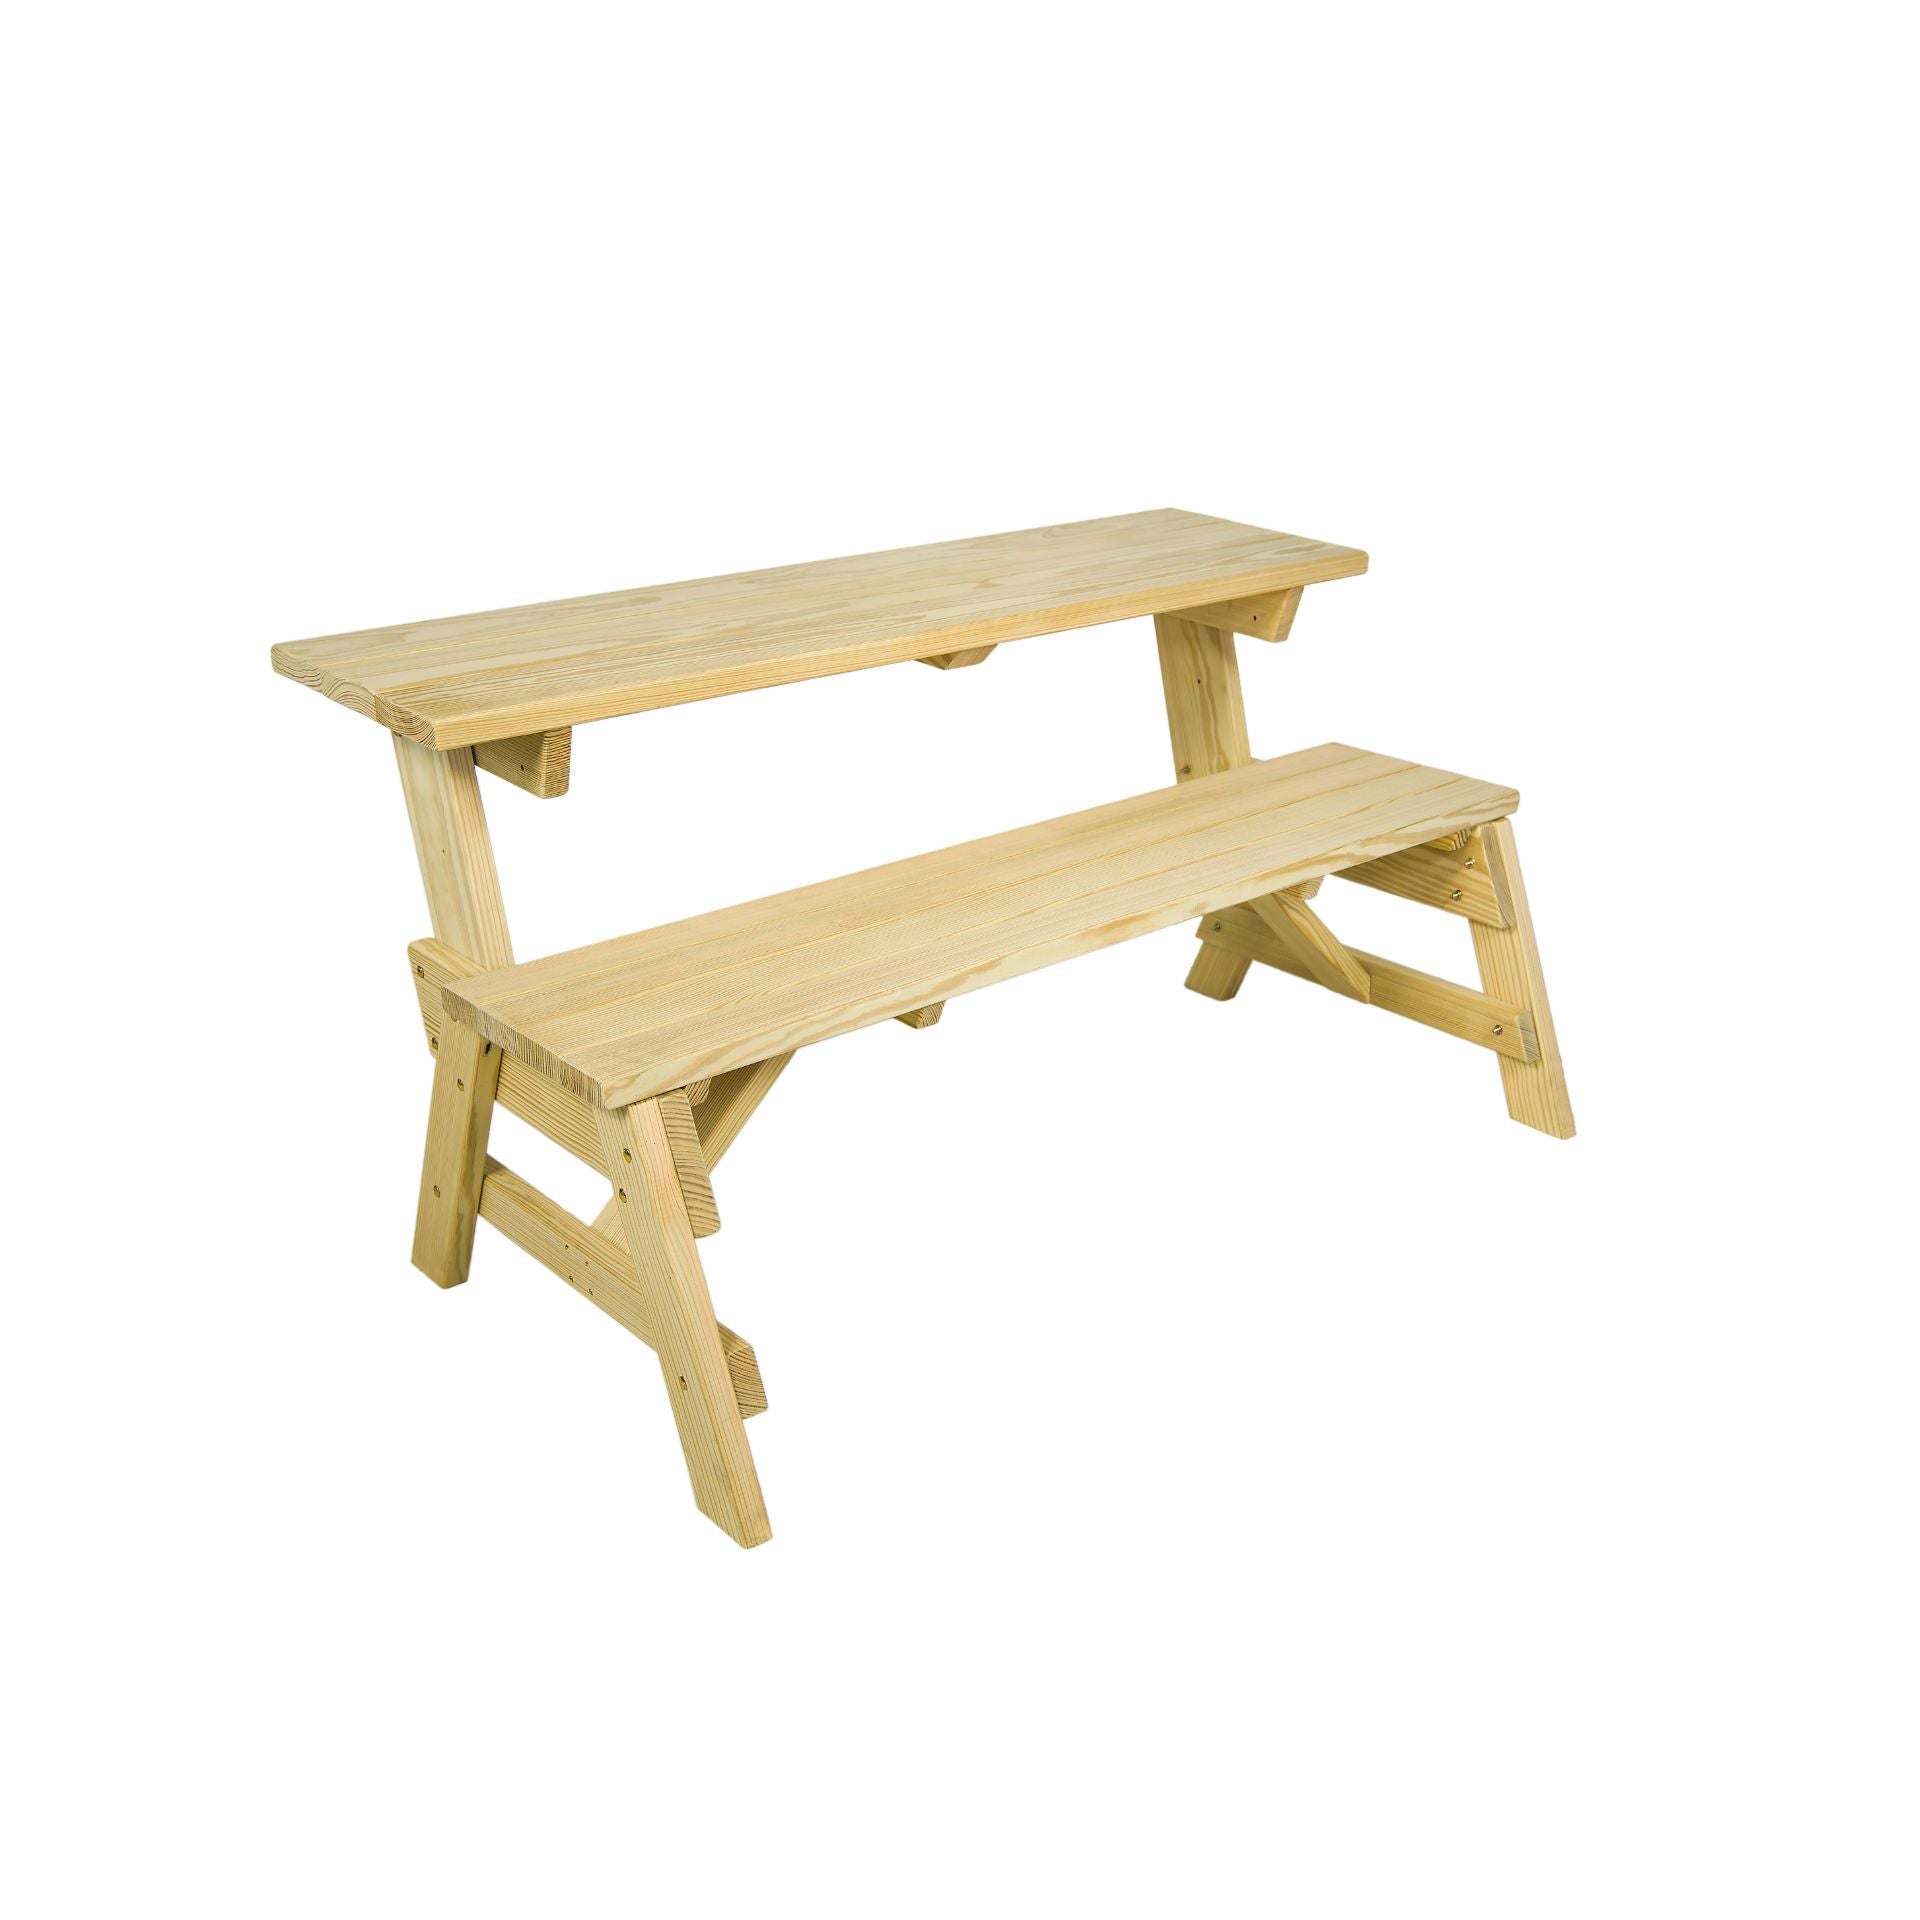 Centerville Amish Heavy-Duty 2-in-1 Convertible Bench Picnic Table